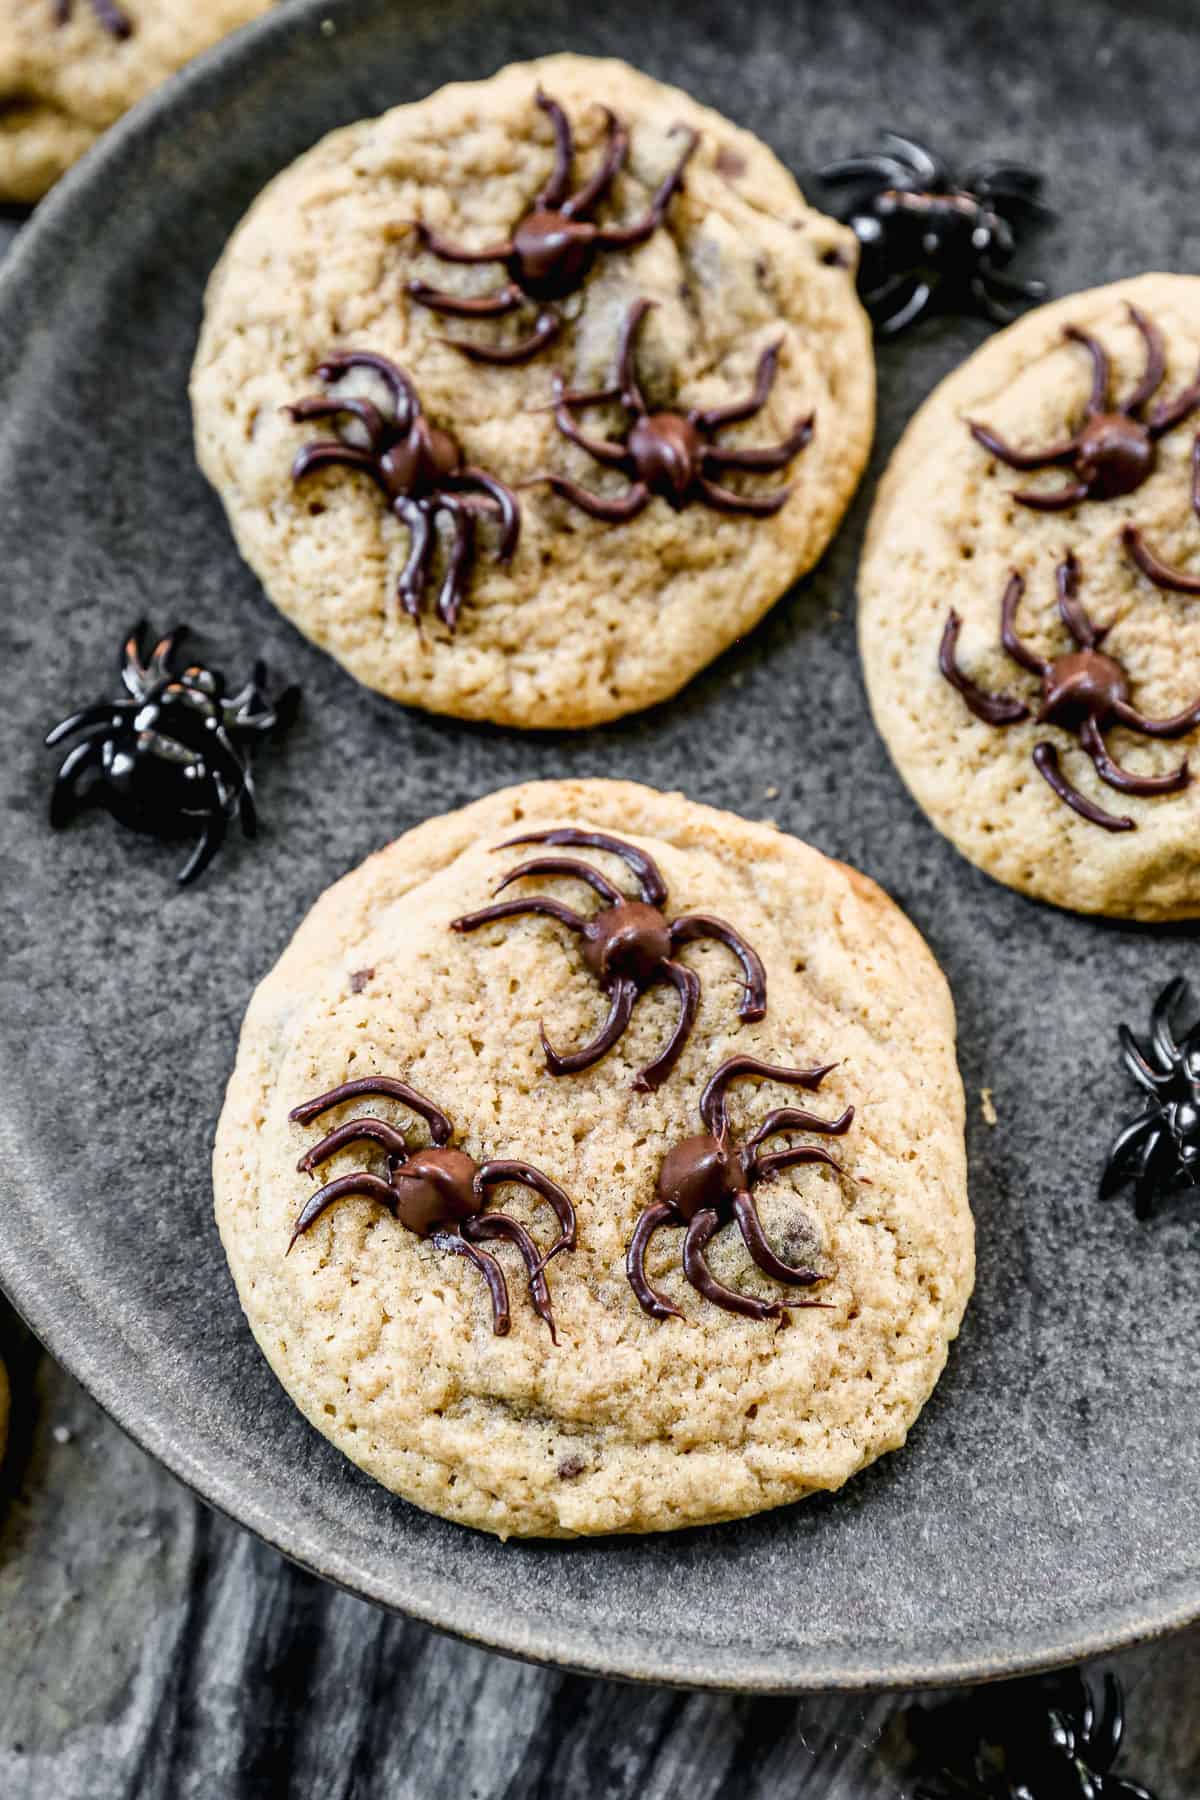 A close-up image of a chocolate chip spider cookie on a plate with two others. 